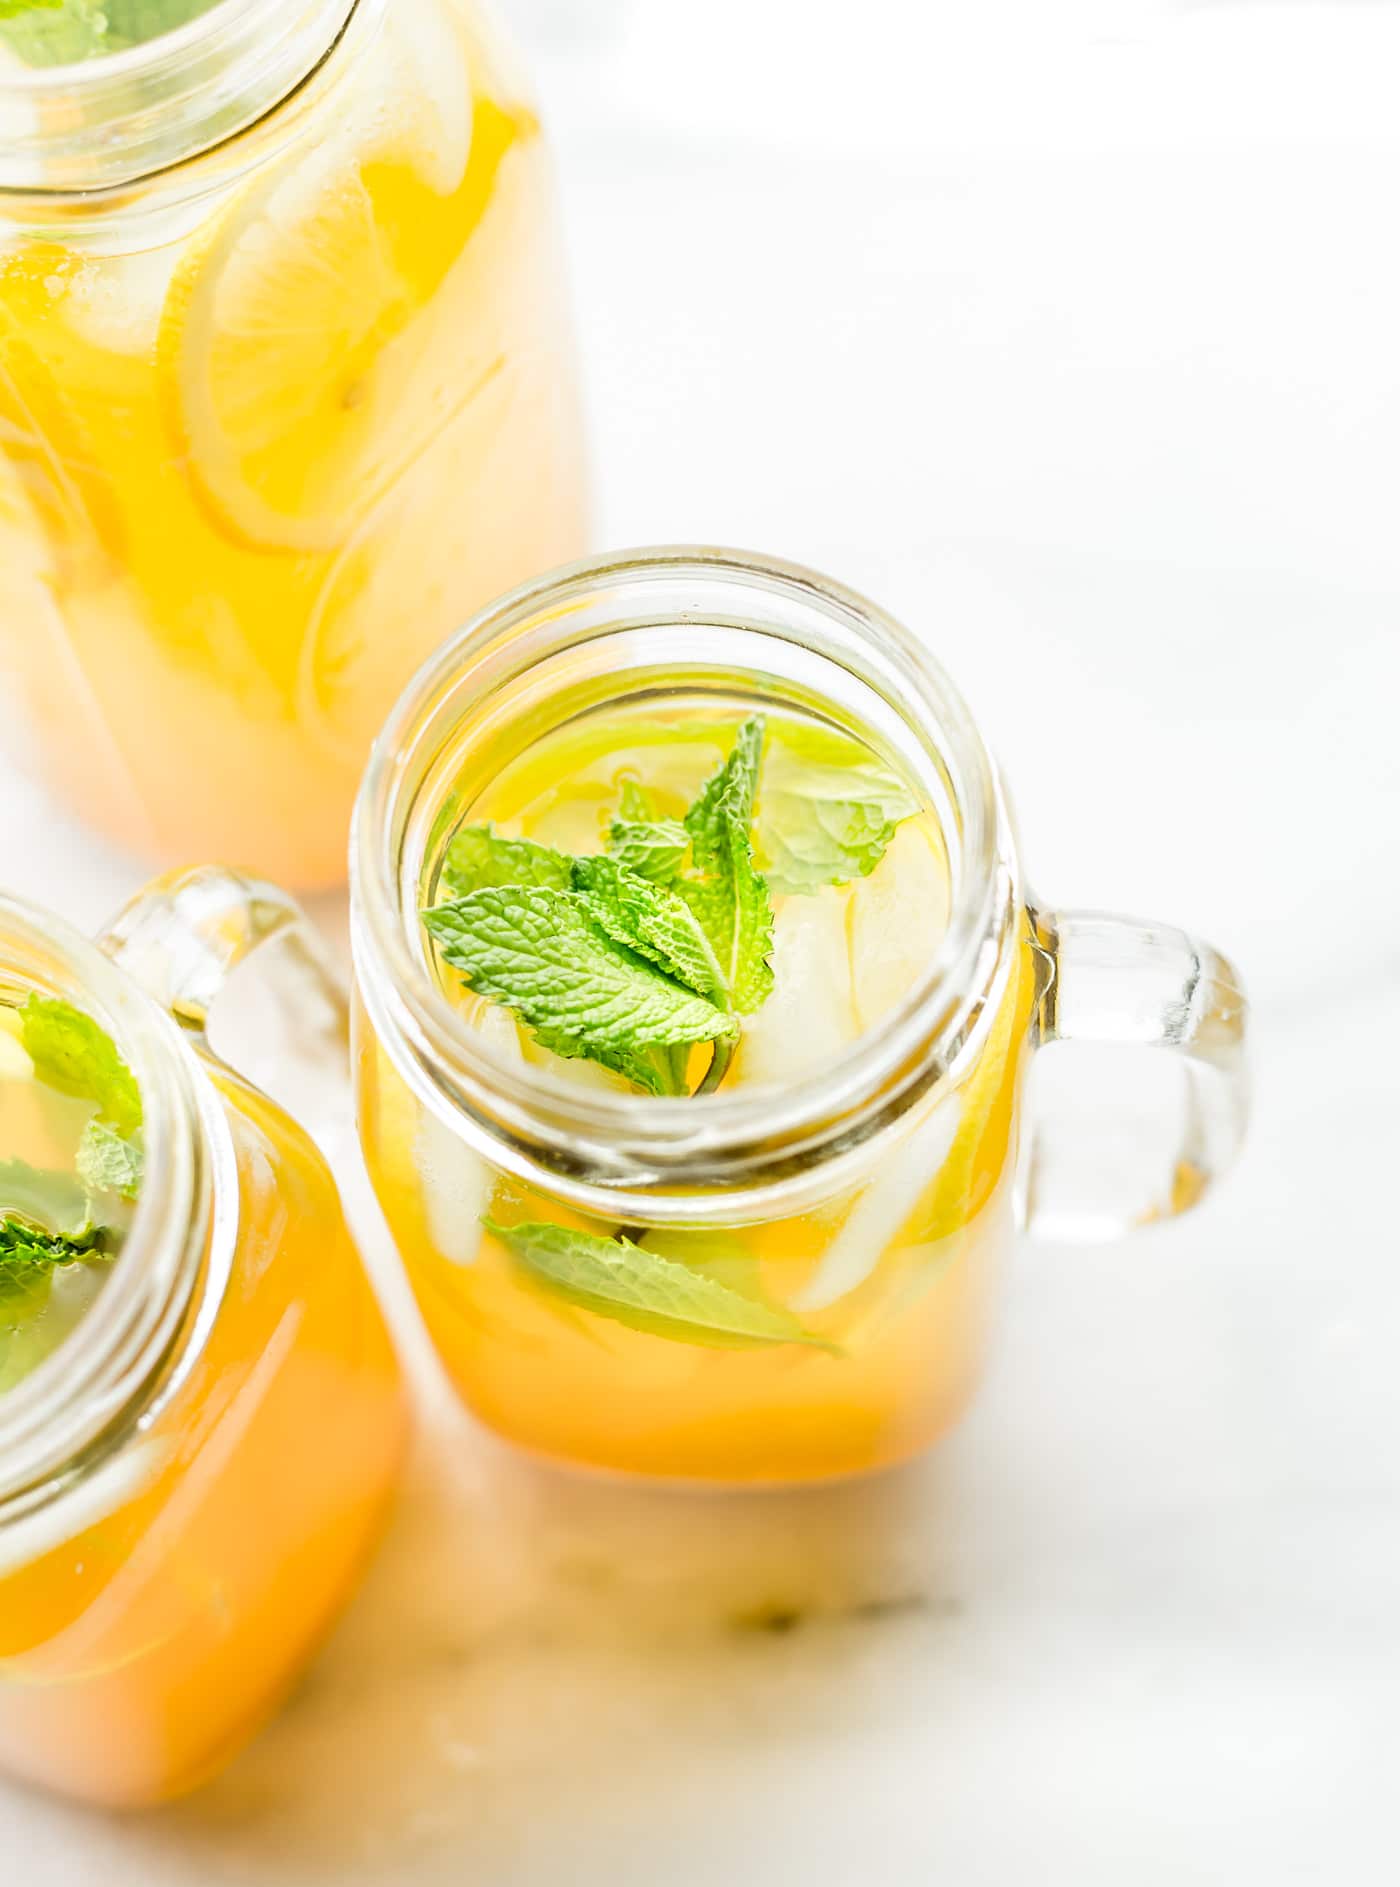 This Turmeric Ginger Lemonade with fresh Mint is great for fighting fatigue and reducing inflammation in the body. It's quick to make, naturally sweetened, and super refreshing! A homemade lemonade with a hint of spice, tartness, and Zing! Vegan, paleo, and AMAZING!